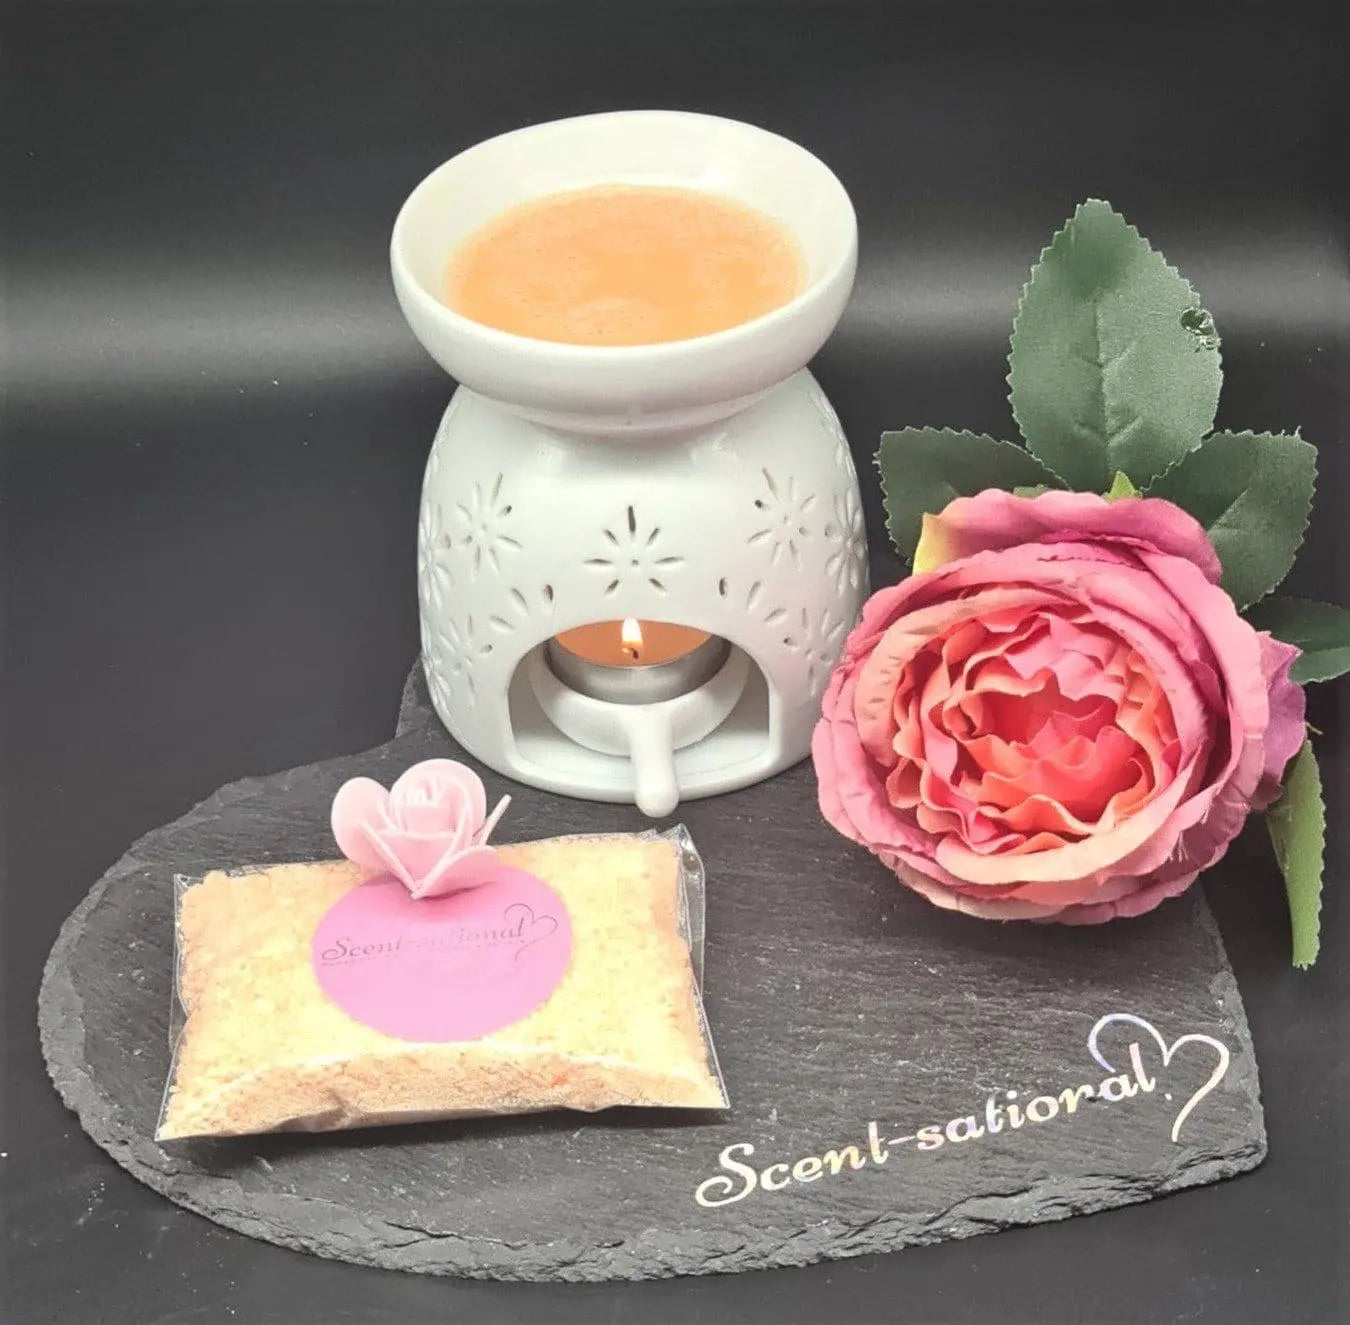 Spa Day Wax Melt Crumble Scent Sational Wax melts